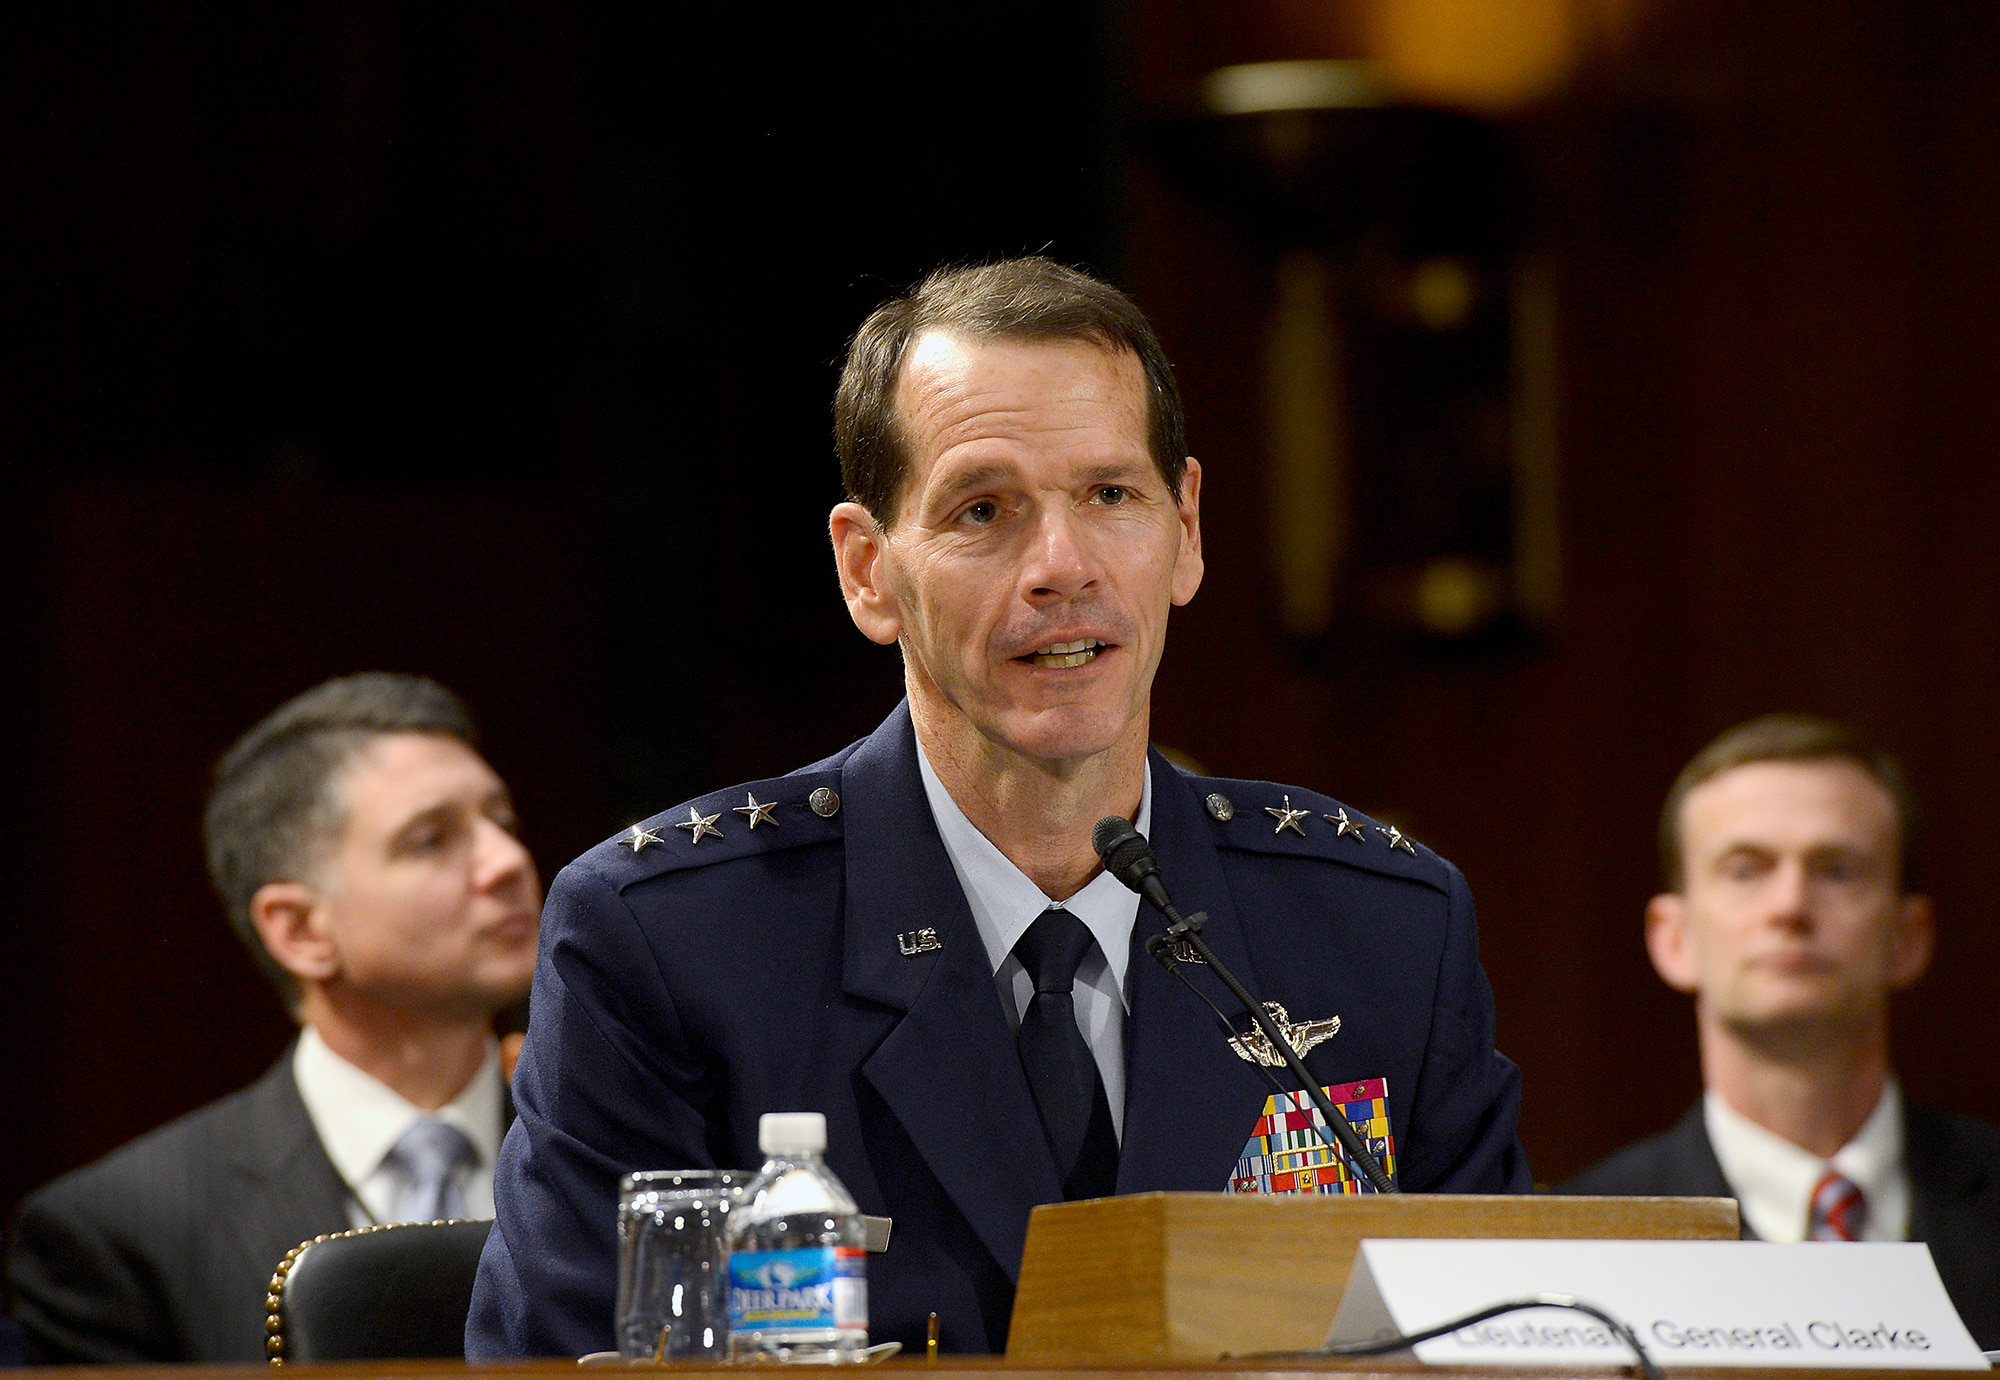 Lt. Gen. Stanley E. Clarke III testifies on the Air Force posture for fiscal year 2015 before the Senate Appropriations Committee on Defense, April 2, 2014, in Washington, D.C.  Also testifying were Secretary of the Air Force Deborah Lee James; Air Force Chief of Staff Gen. Mark A. Welsh III; Gen. James "JJ" Jackson, the Air Force Reserve chief; and Gen. Frank J. Grass, the National Guard bureau chief. Clarke is the Air National Guard director (U.S. Air Force photo/Scott M. Ash)